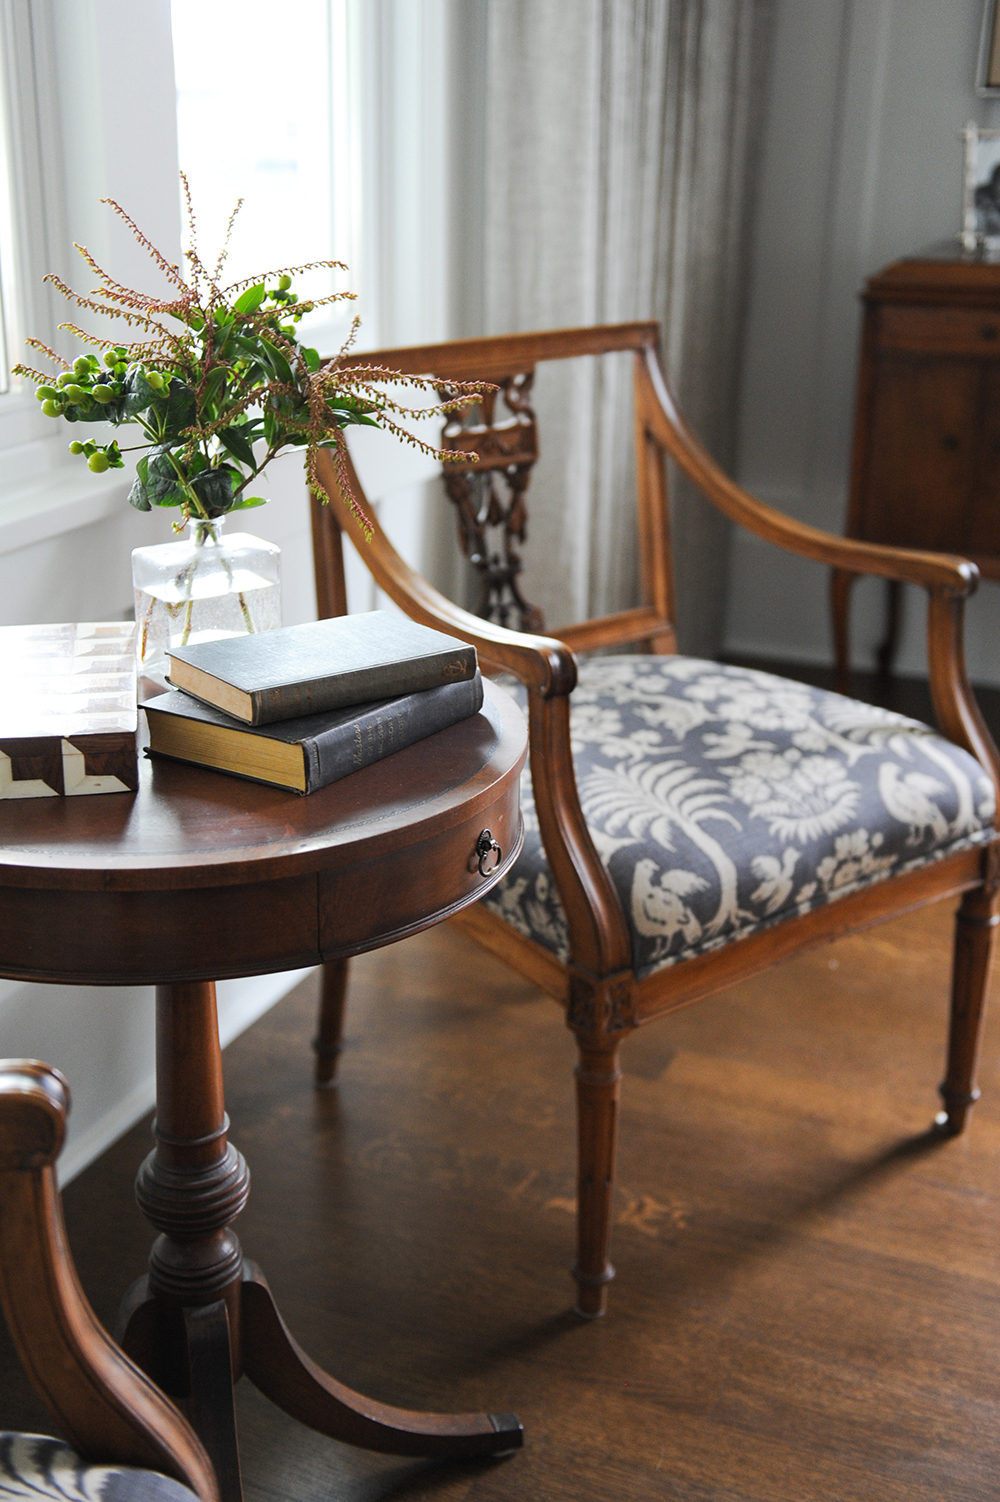 An antique chair upholstered in a lively patterned fabric.